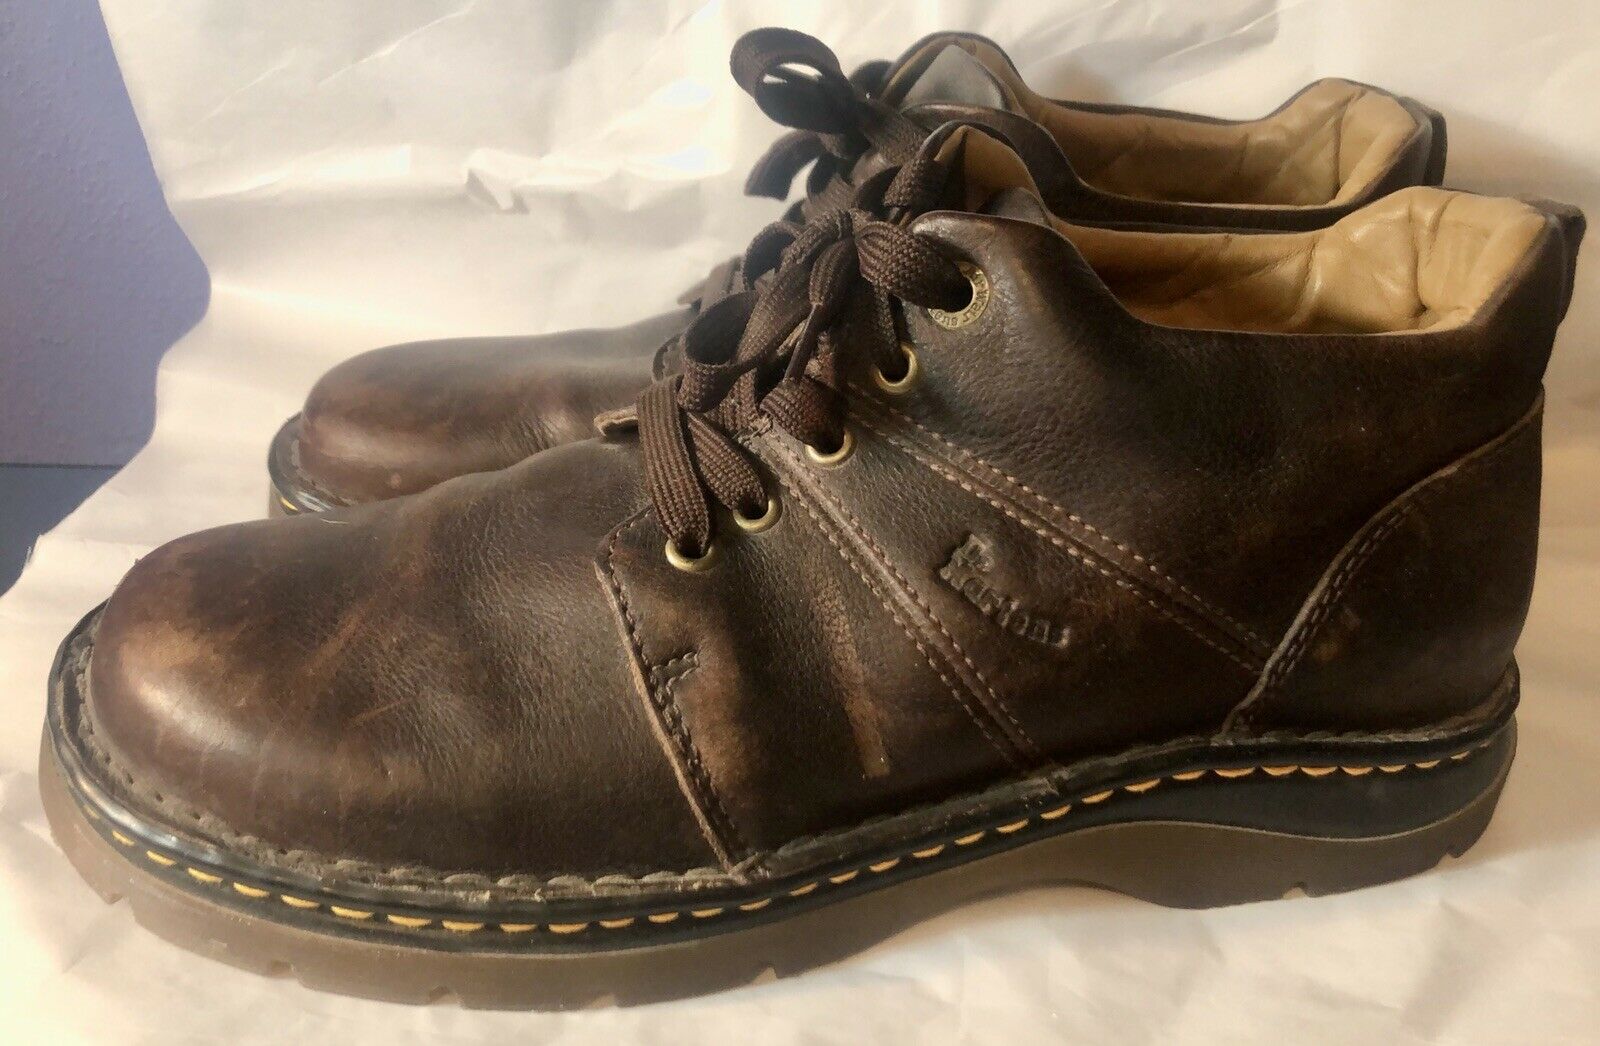 Dr Doc Marten Men’s 5 Eye Brown Leather Shoes Oxford Low Boot 10M Distressed